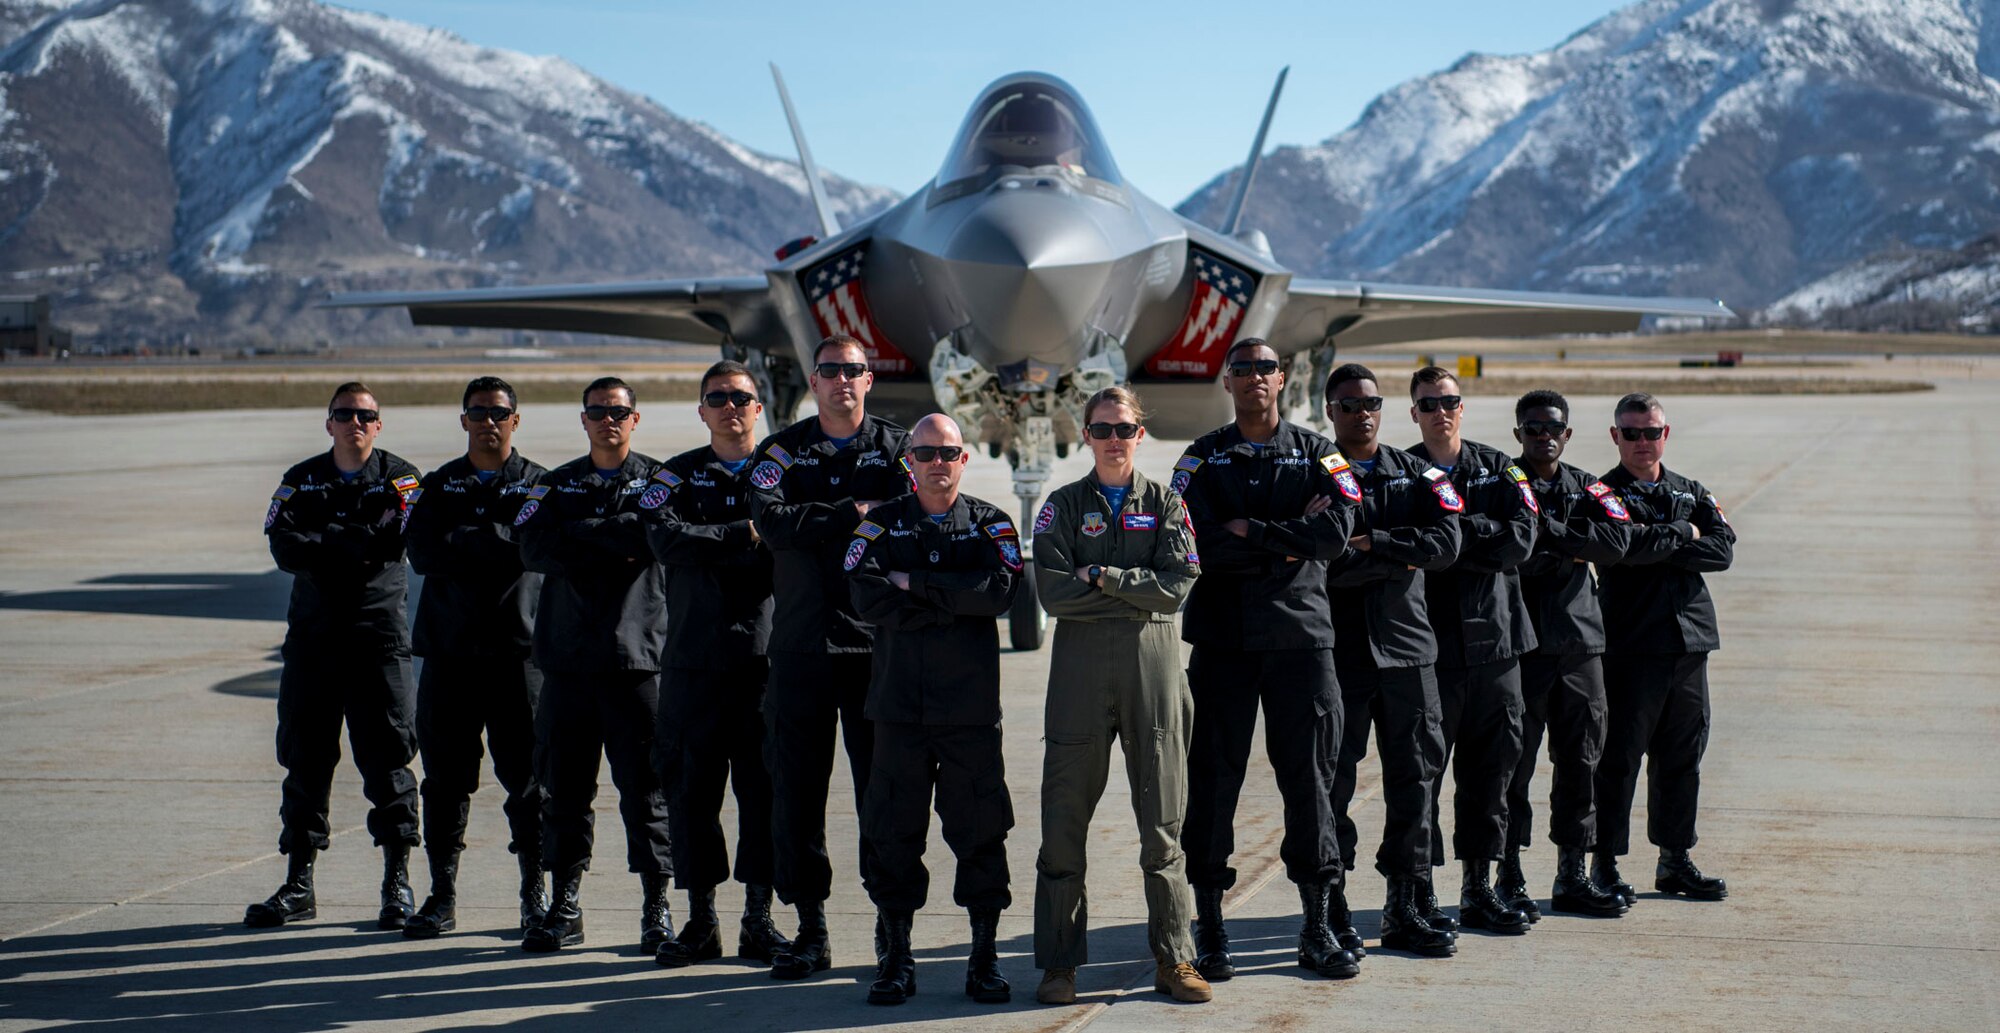 A F-35A Lightning II Demonstration Team group picture in front of an F-35A.